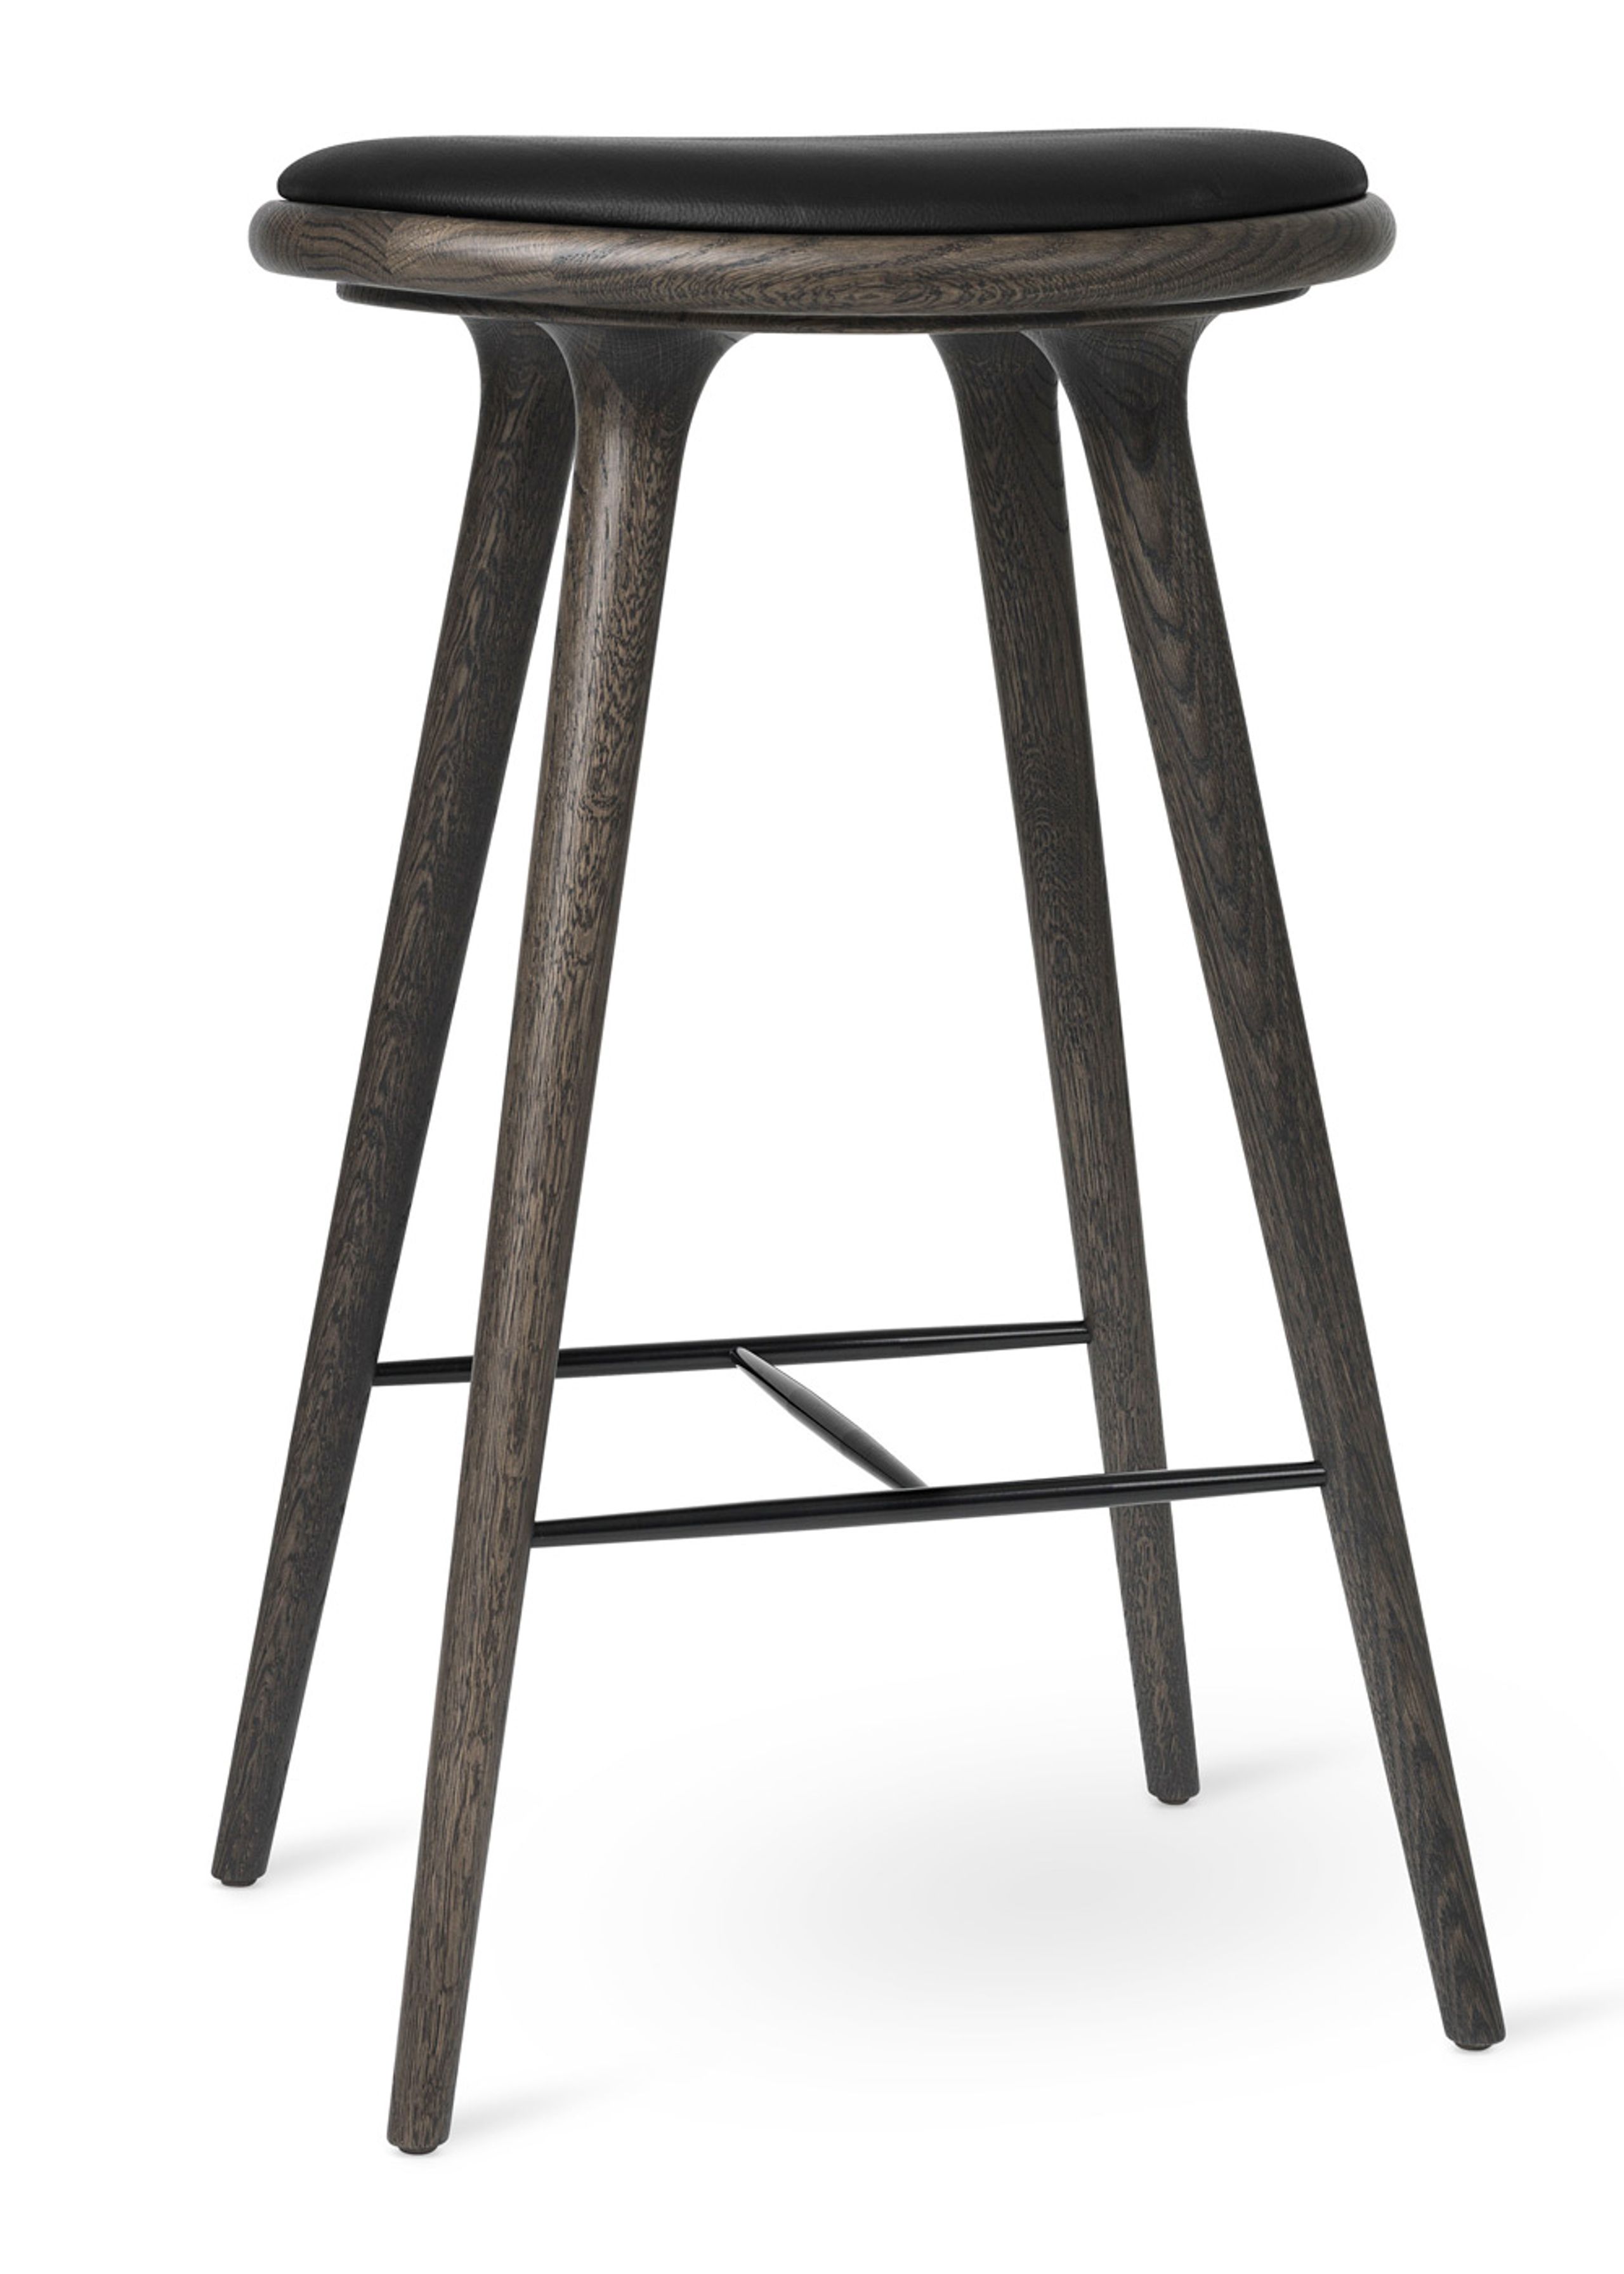 Mater - Chair - High Stool 74 - Sirka Grey Stained Oak